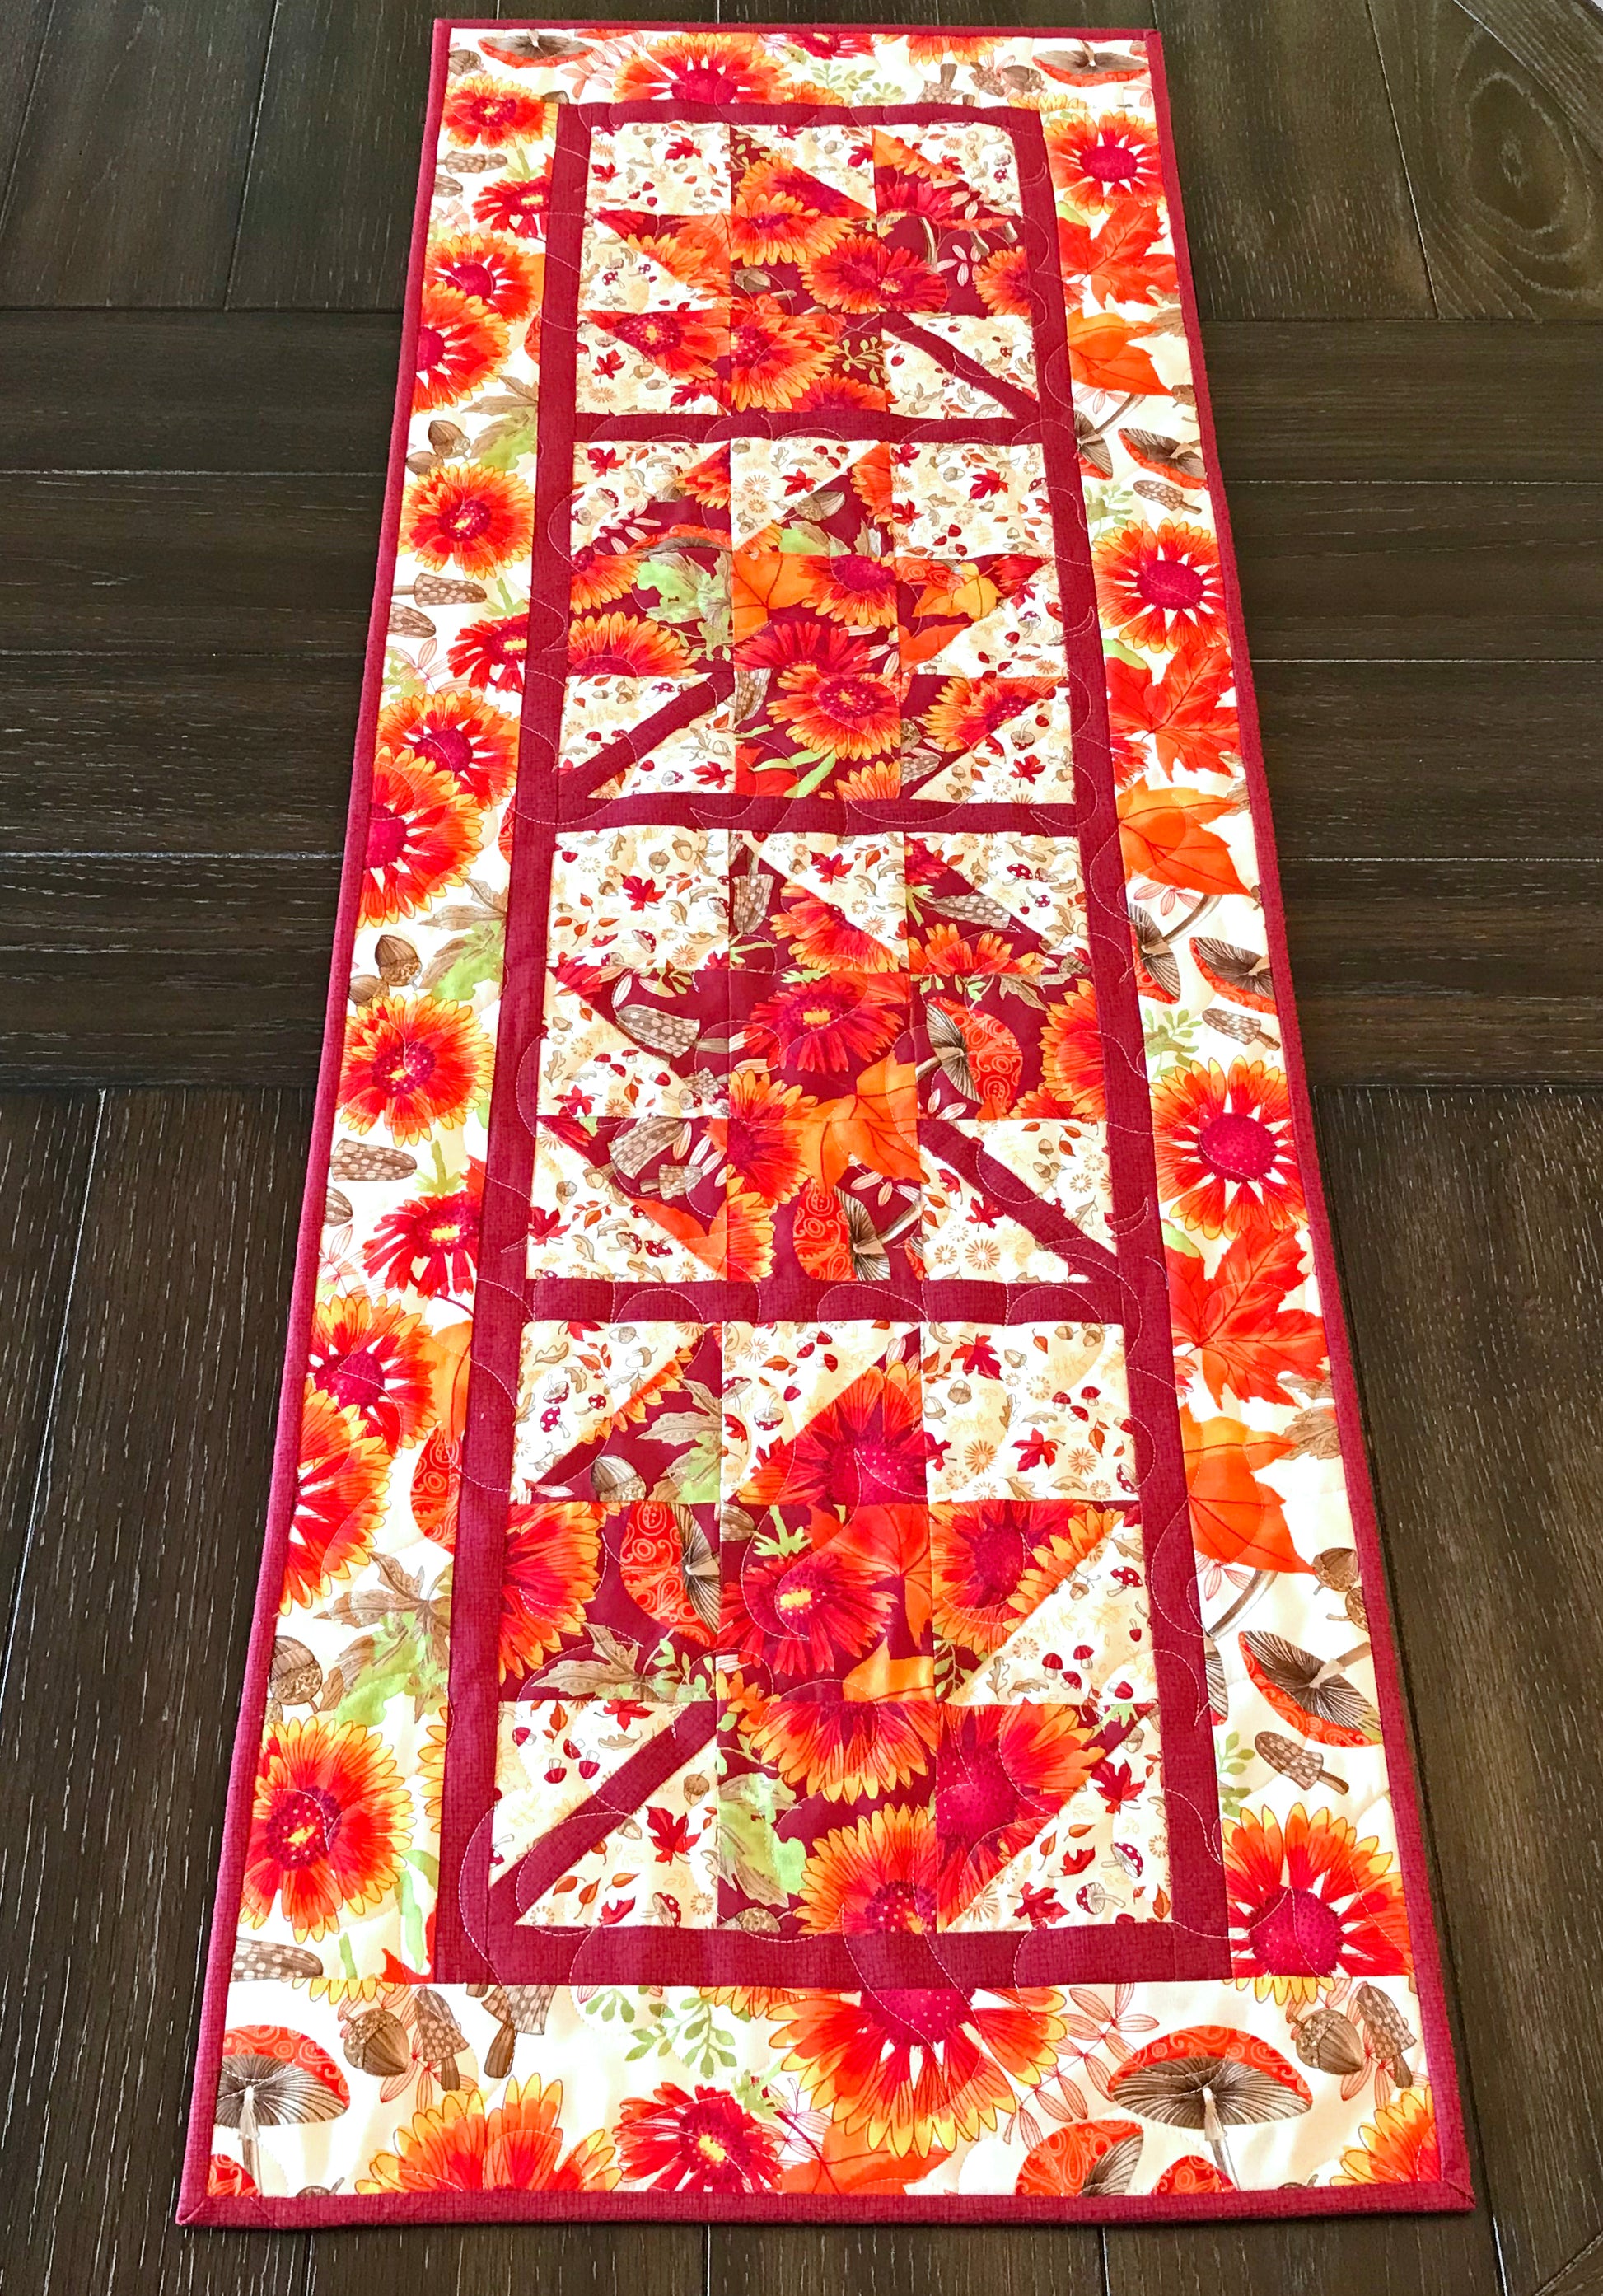 Fall Leaves table runner pattern featuring 4 maple leaf blocks surrounded by sashing and a matching border.